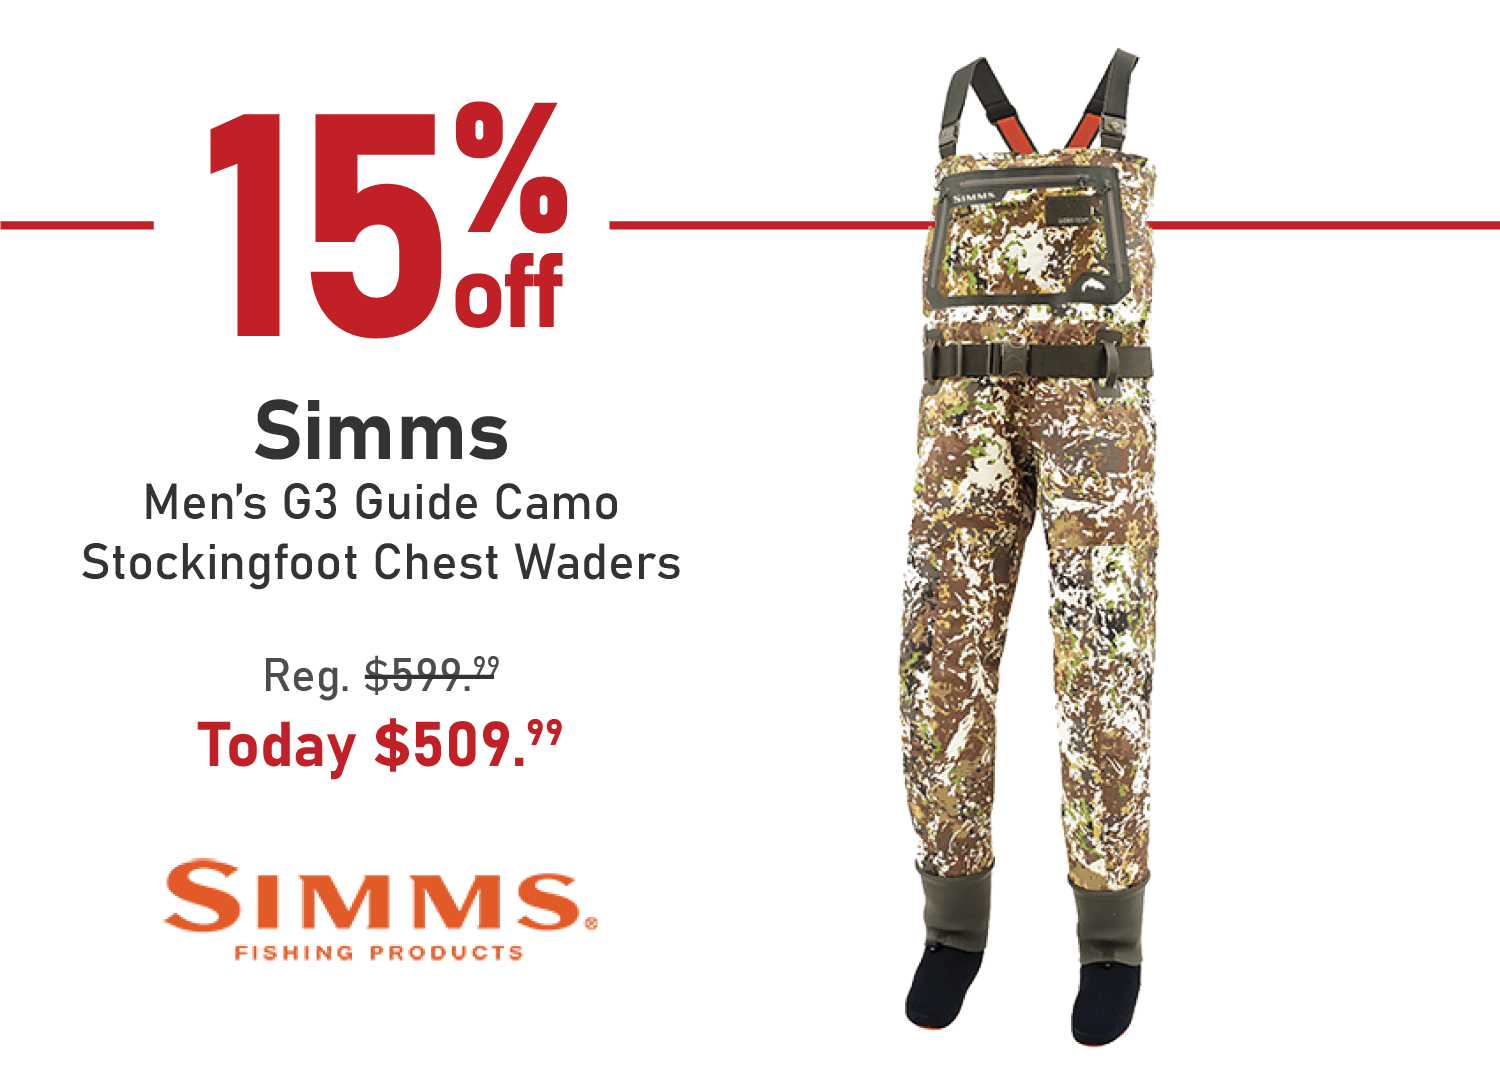 Take 15% off the Simms Men's G3 Guide Camo Stockingfoot Chest Waders